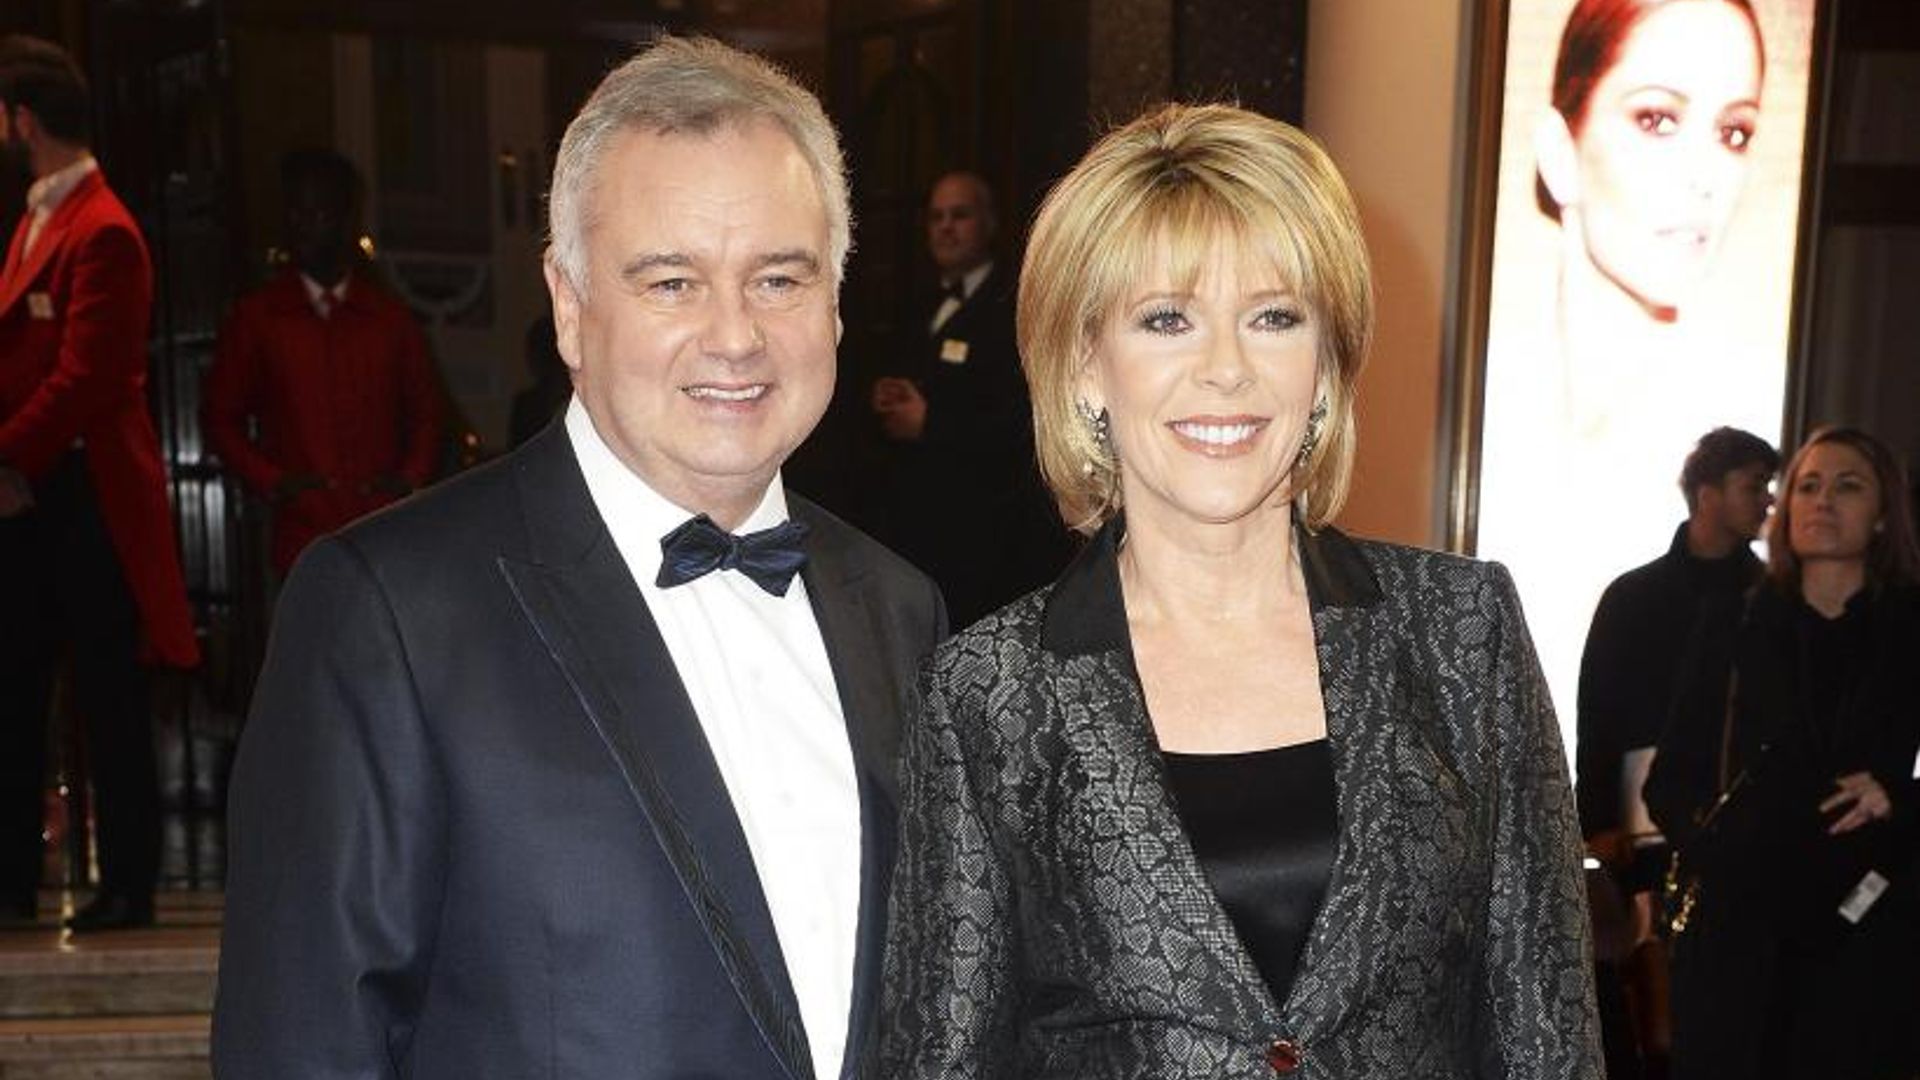 Find out why Eamonn Holmes asked Ruth Langsford if she wanted to leave Strictly